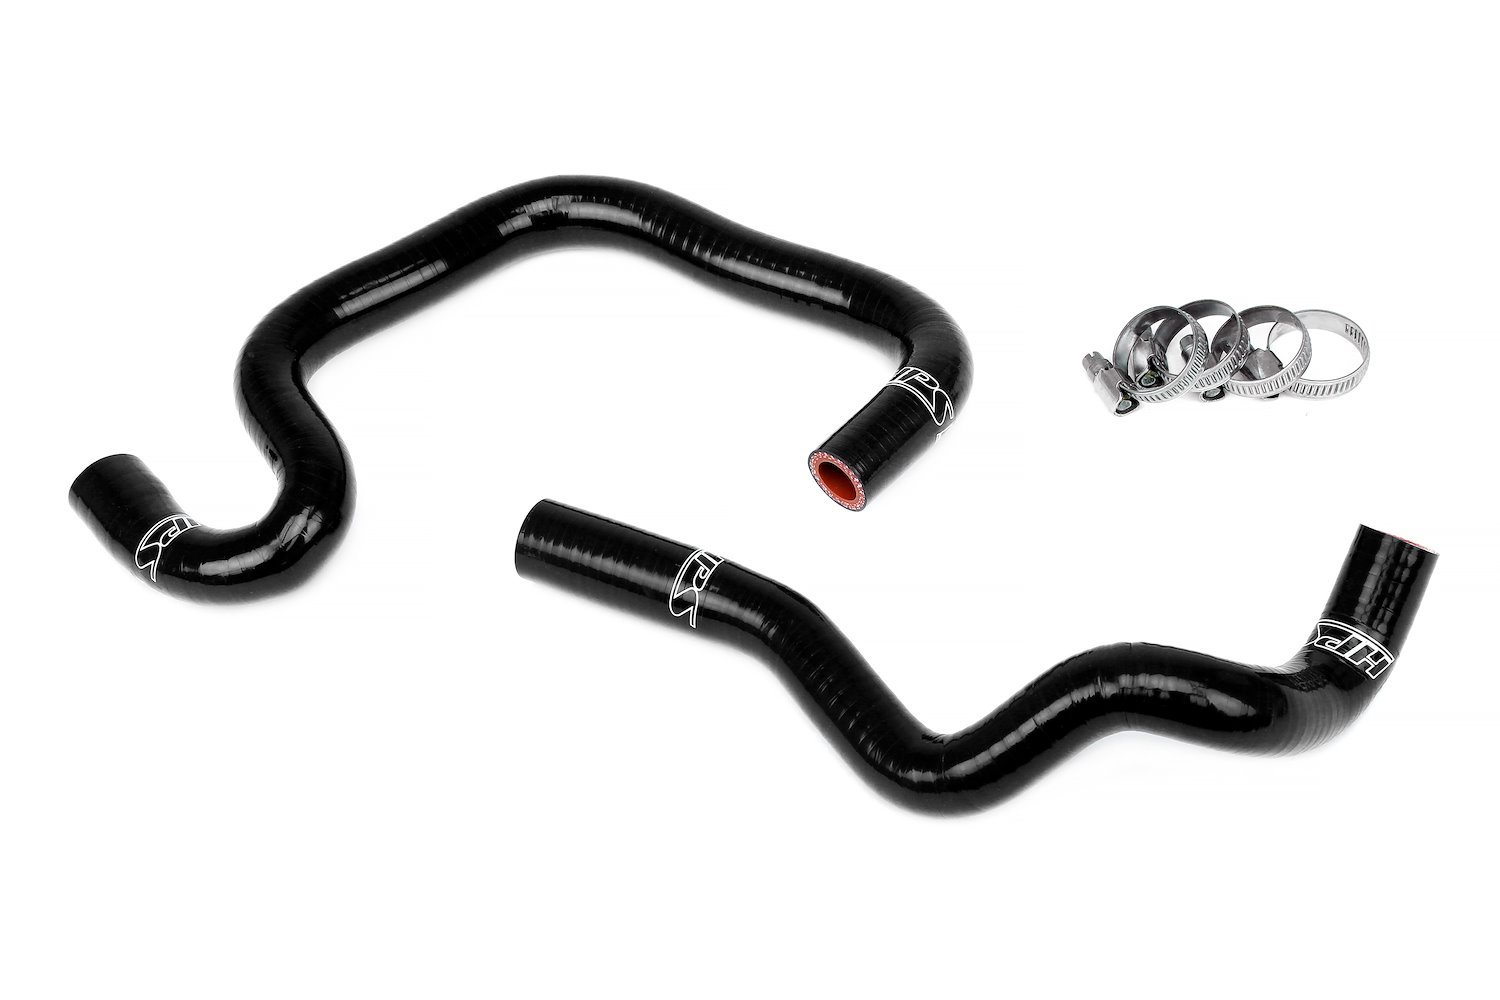 57-1082-BLK Heater Hose Kit, 3-Ply Reinforced Silicone, Replaces Rubber Heater Coolant Hoses